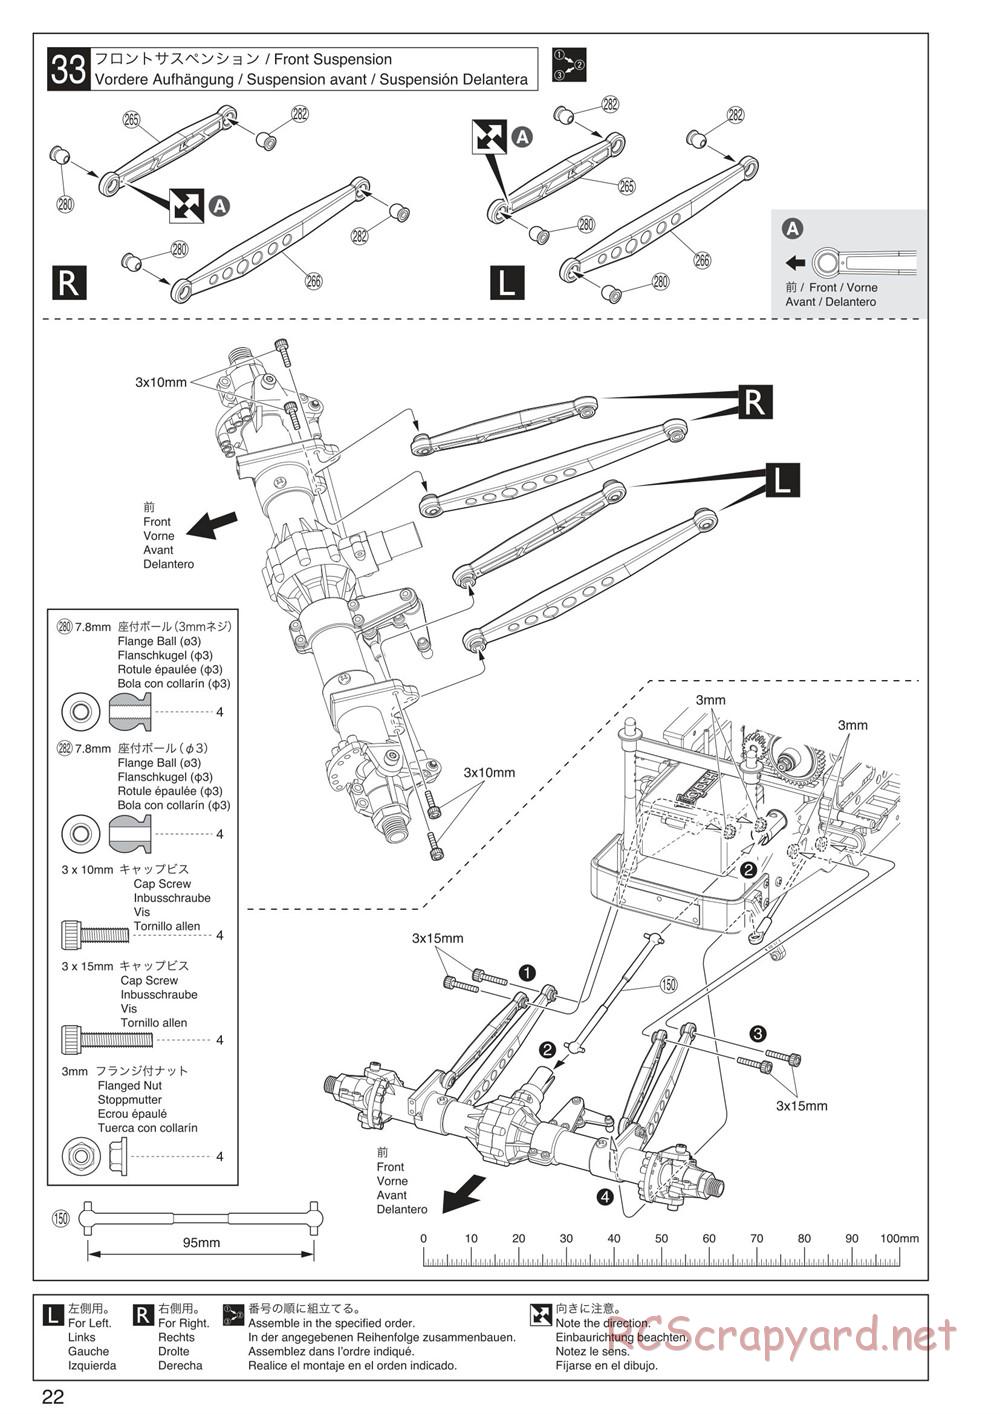 Kyosho - Mad Crusher VE - Manual - Page 22